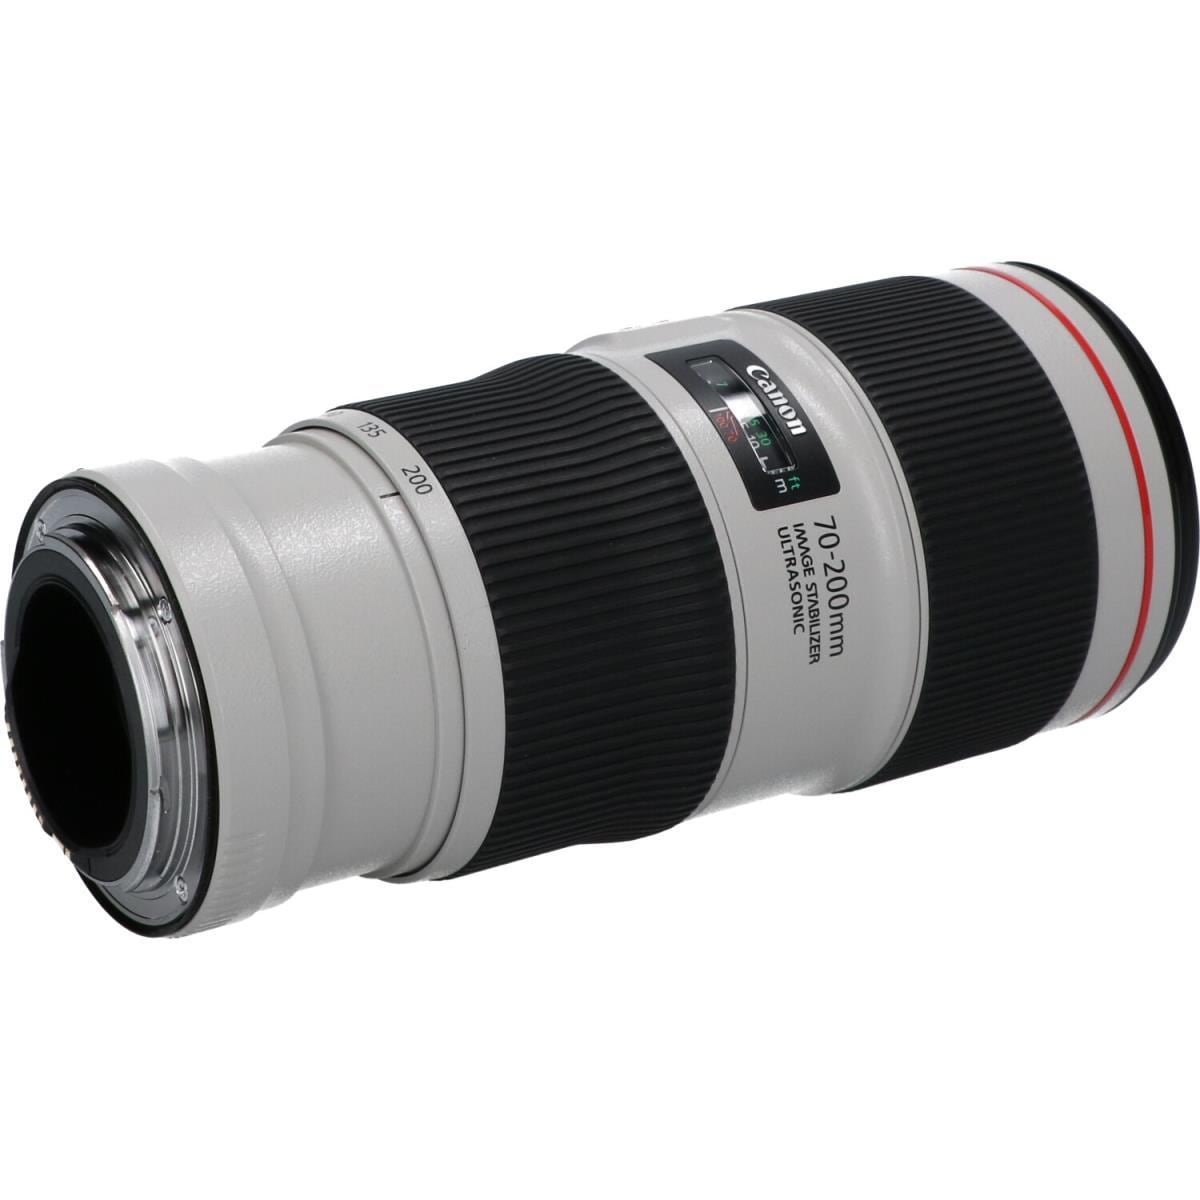 CANON EF70-200mm F4L ISIIUSM